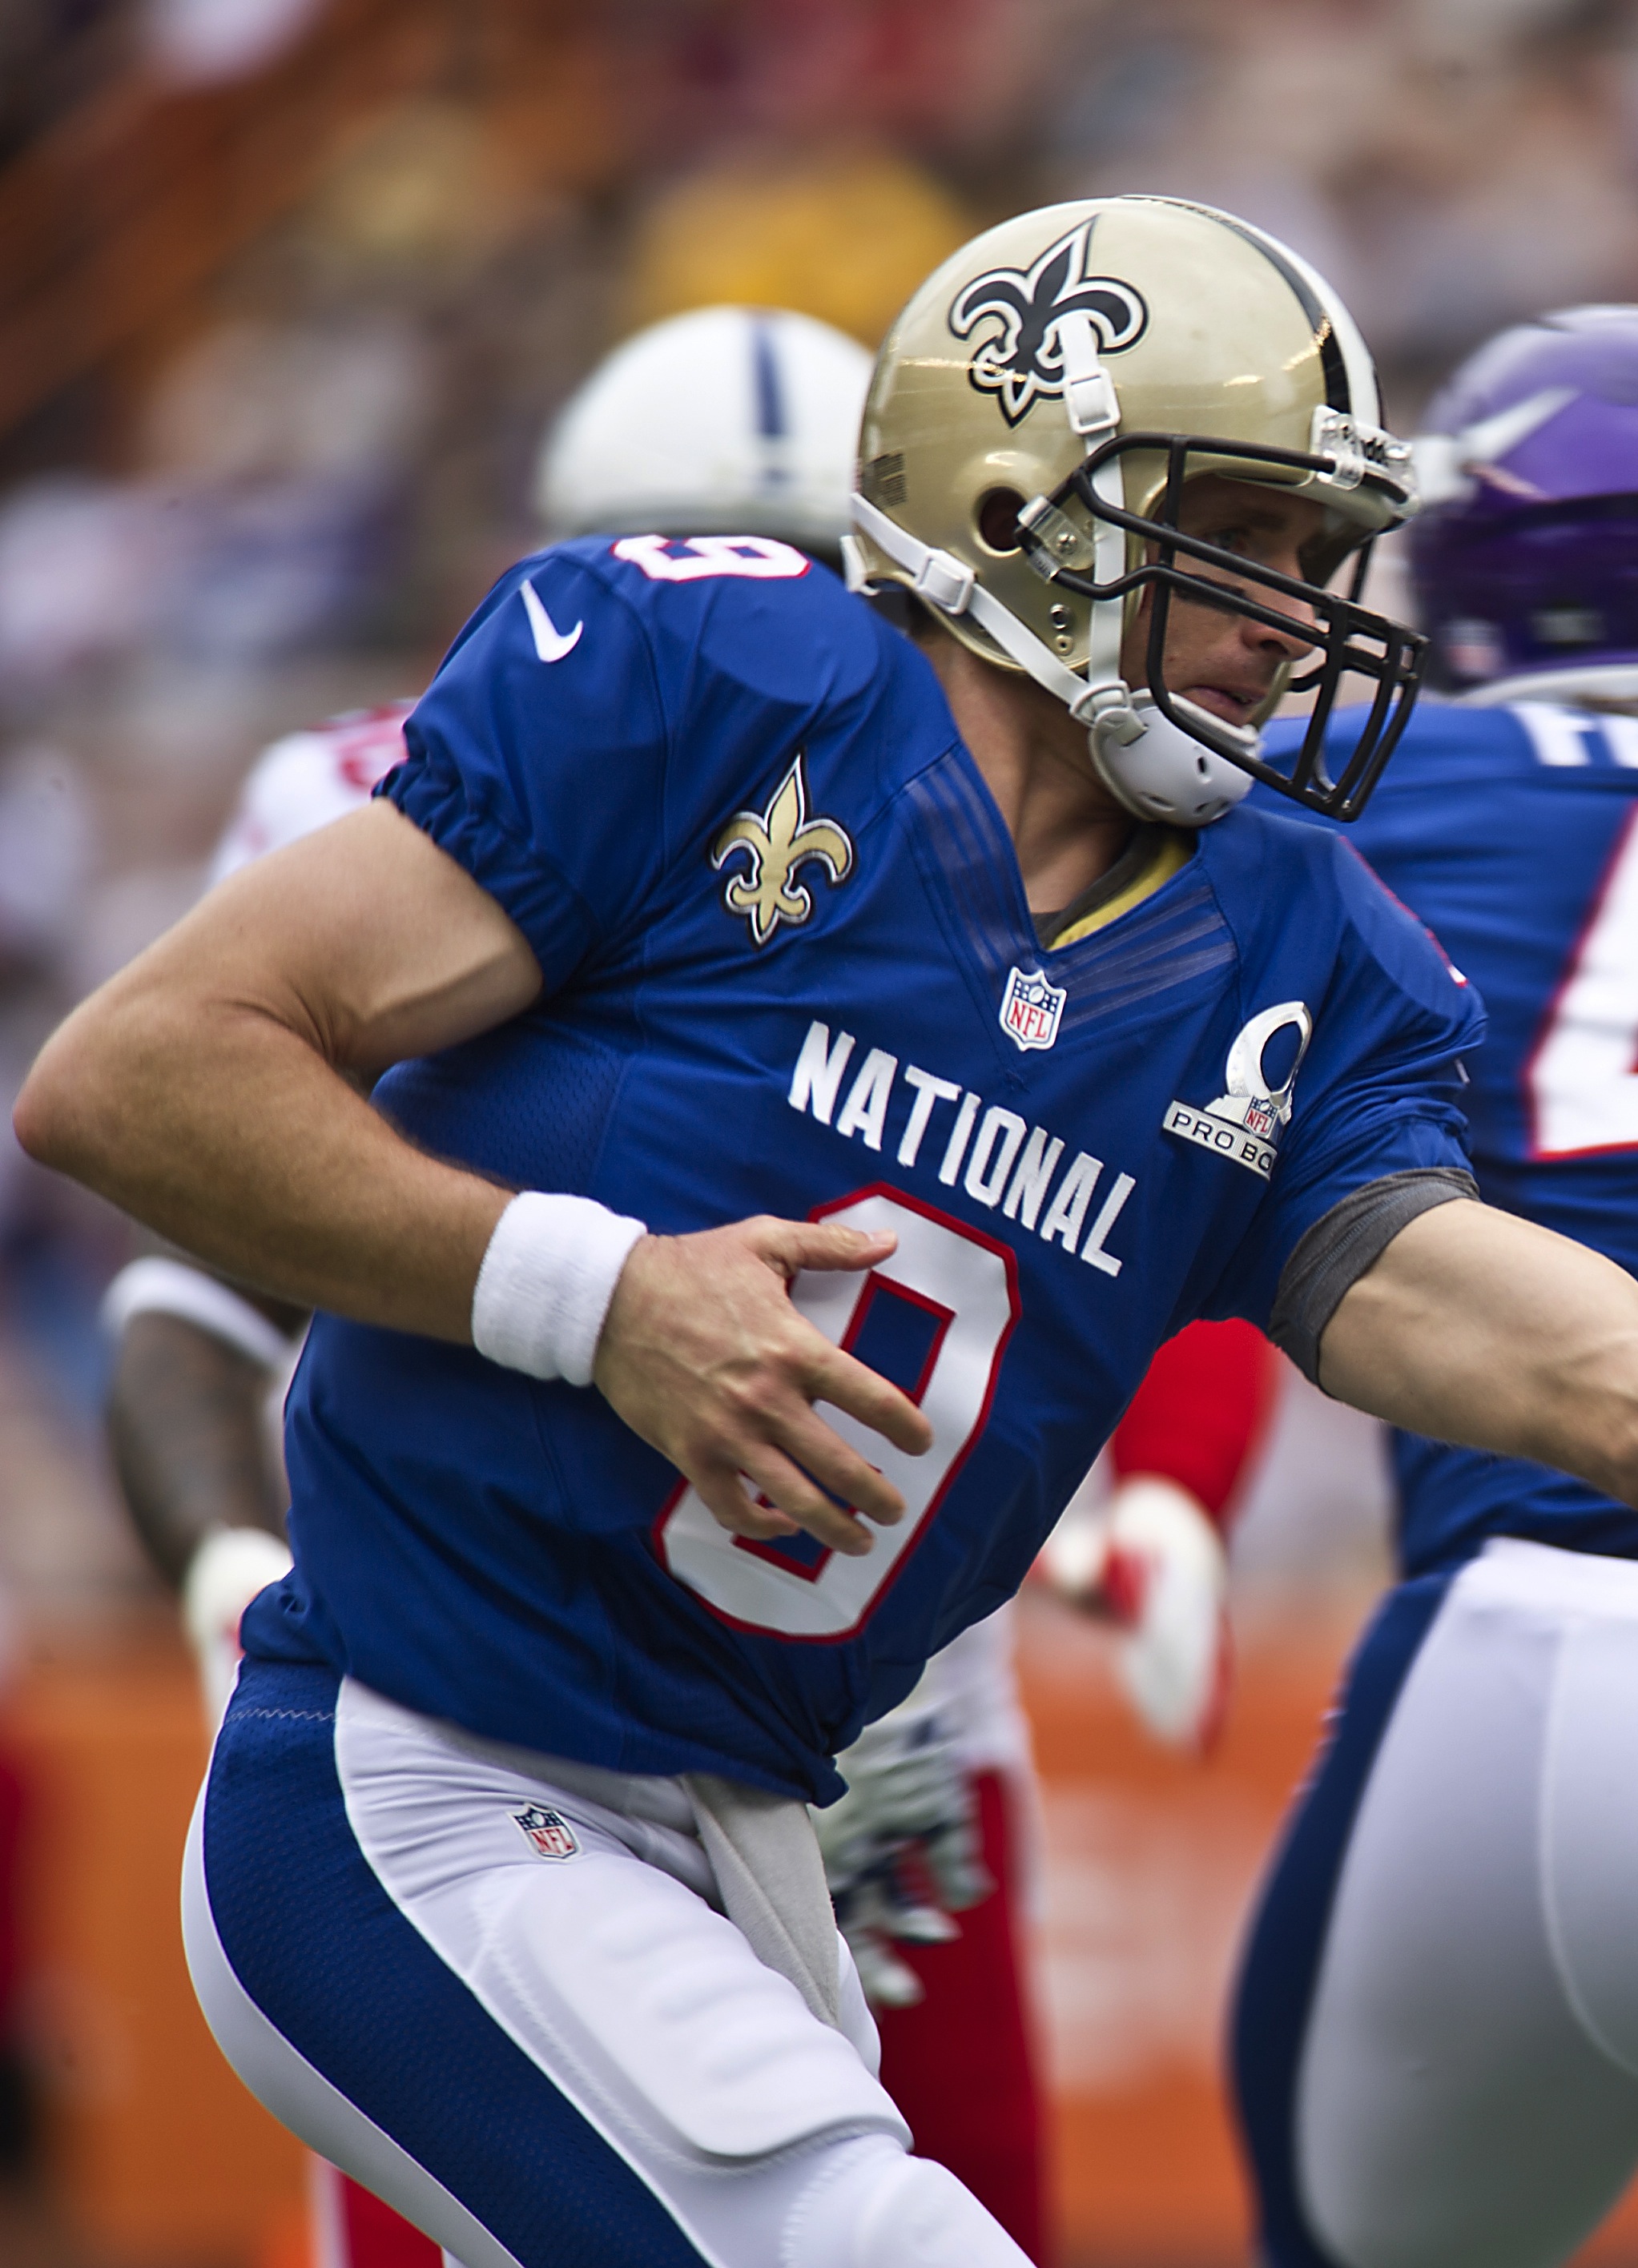 Saints' Drew Brees becomes first NFL player to reach 80,000 passing yards